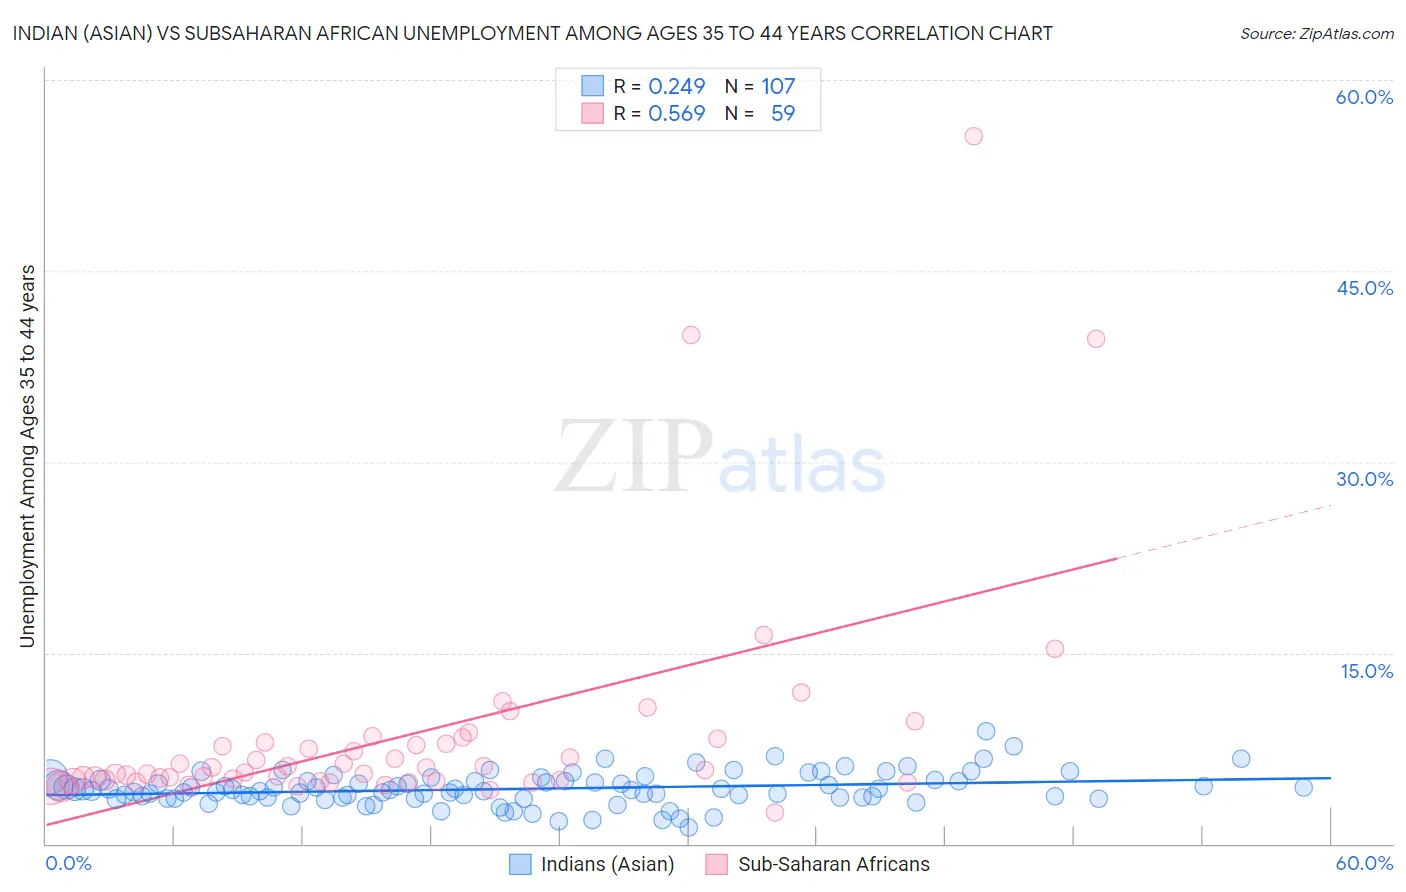 Indian (Asian) vs Subsaharan African Unemployment Among Ages 35 to 44 years